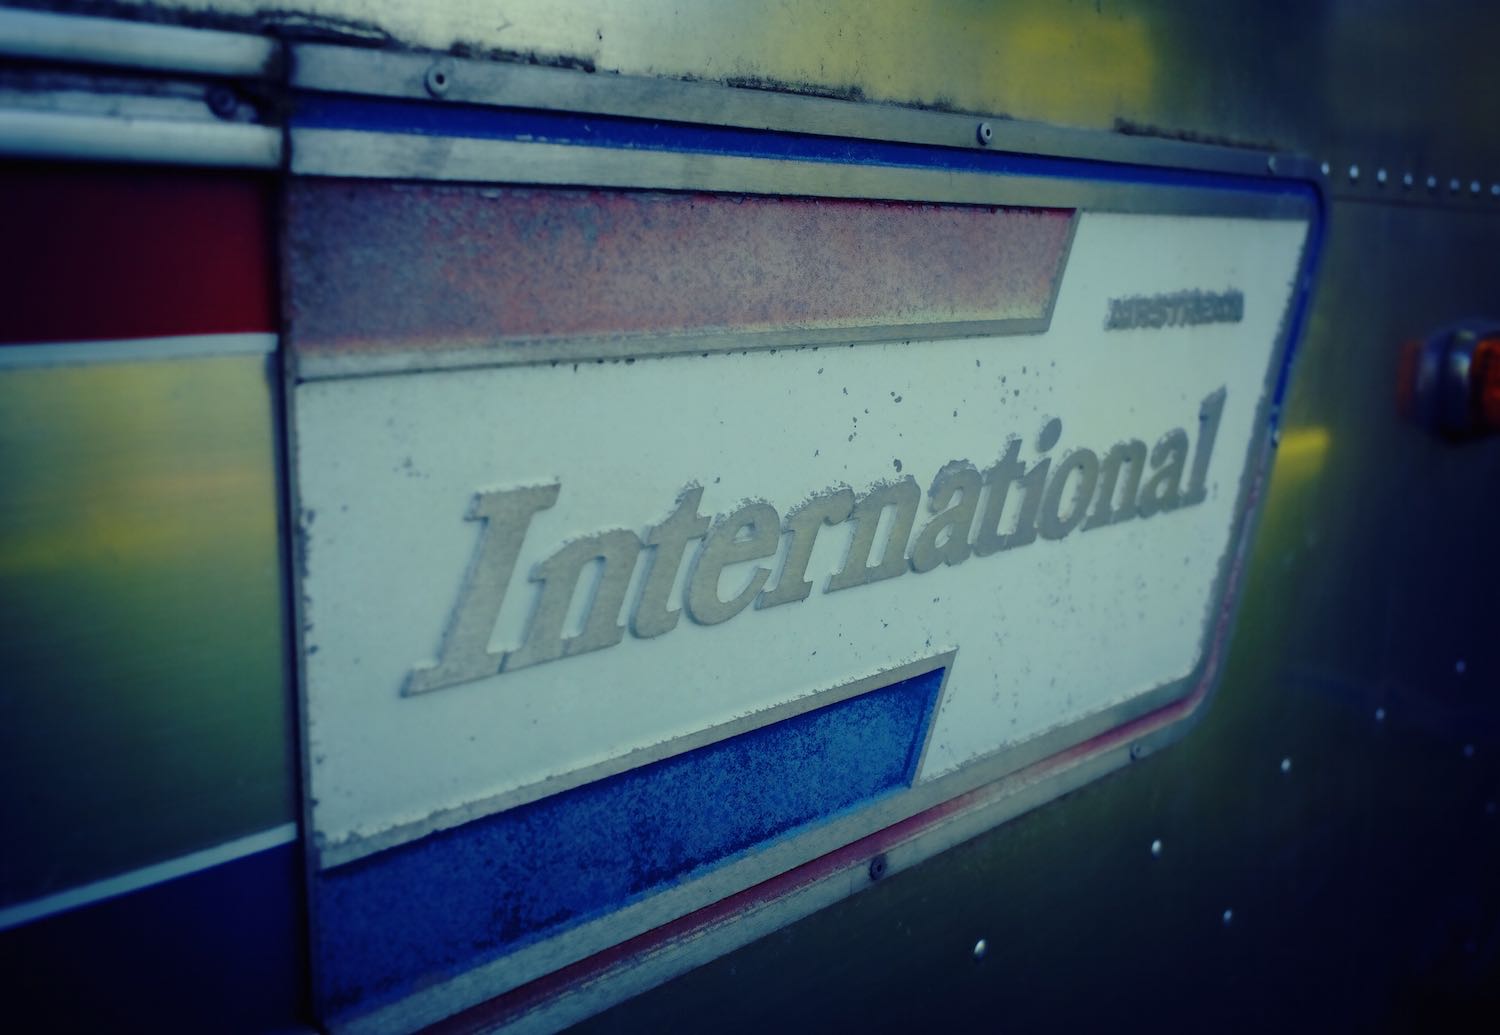 A view of our Airstream International Land Yacht emblem.